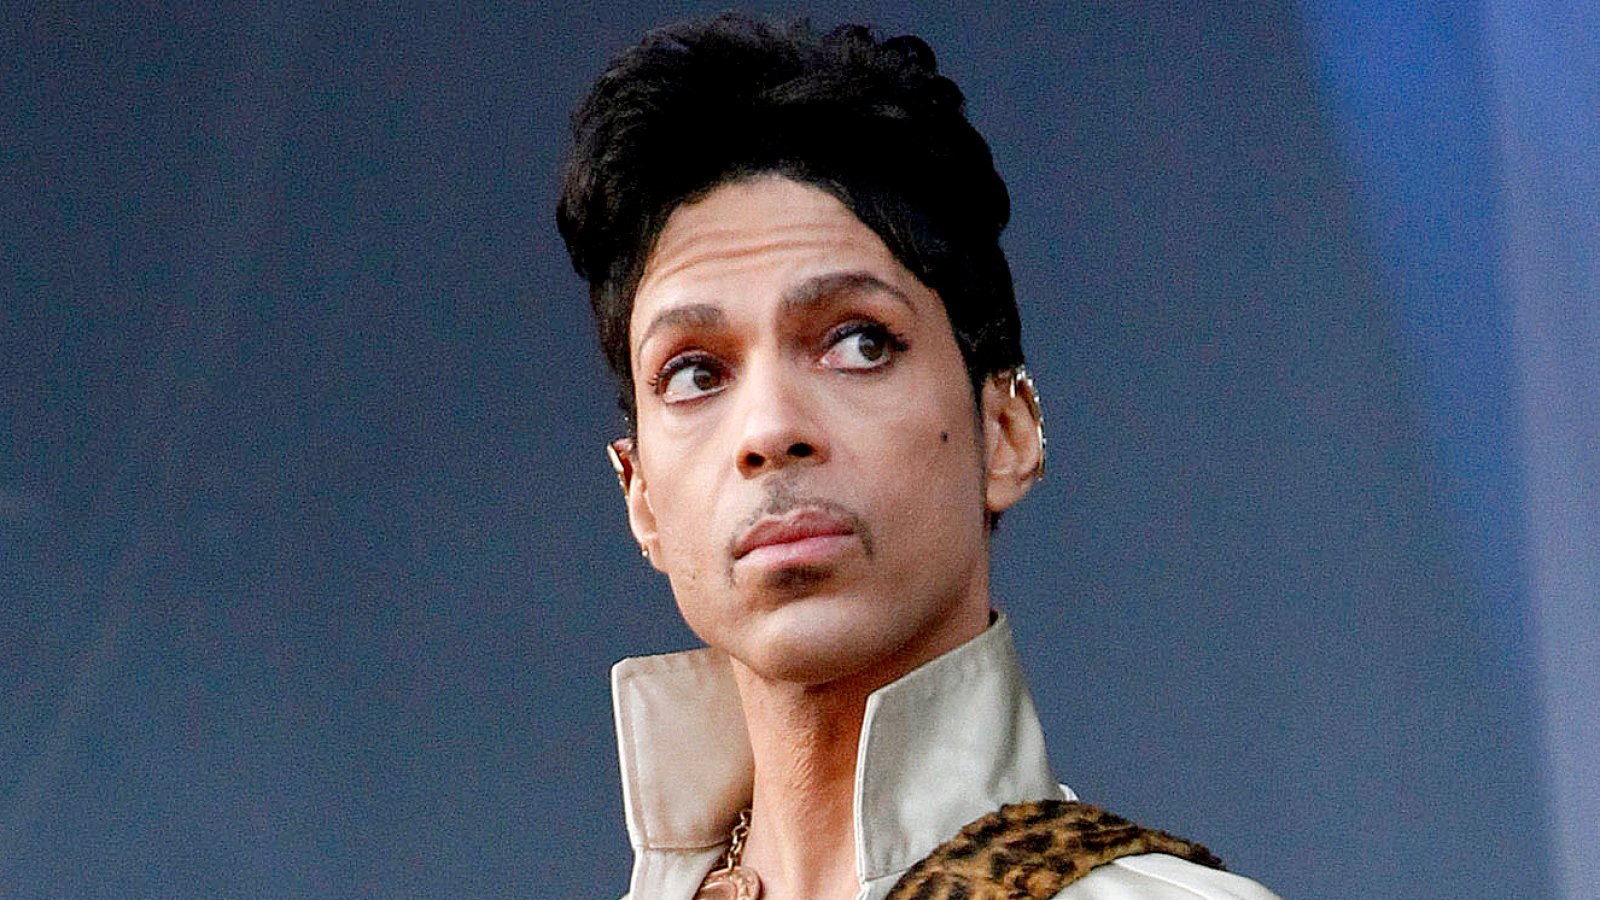 Prince performs during his "Welcome 2 Europe" tour at The Hop Farm Festival on July 3, 2011 in Paddock Wood, United Kingdom.